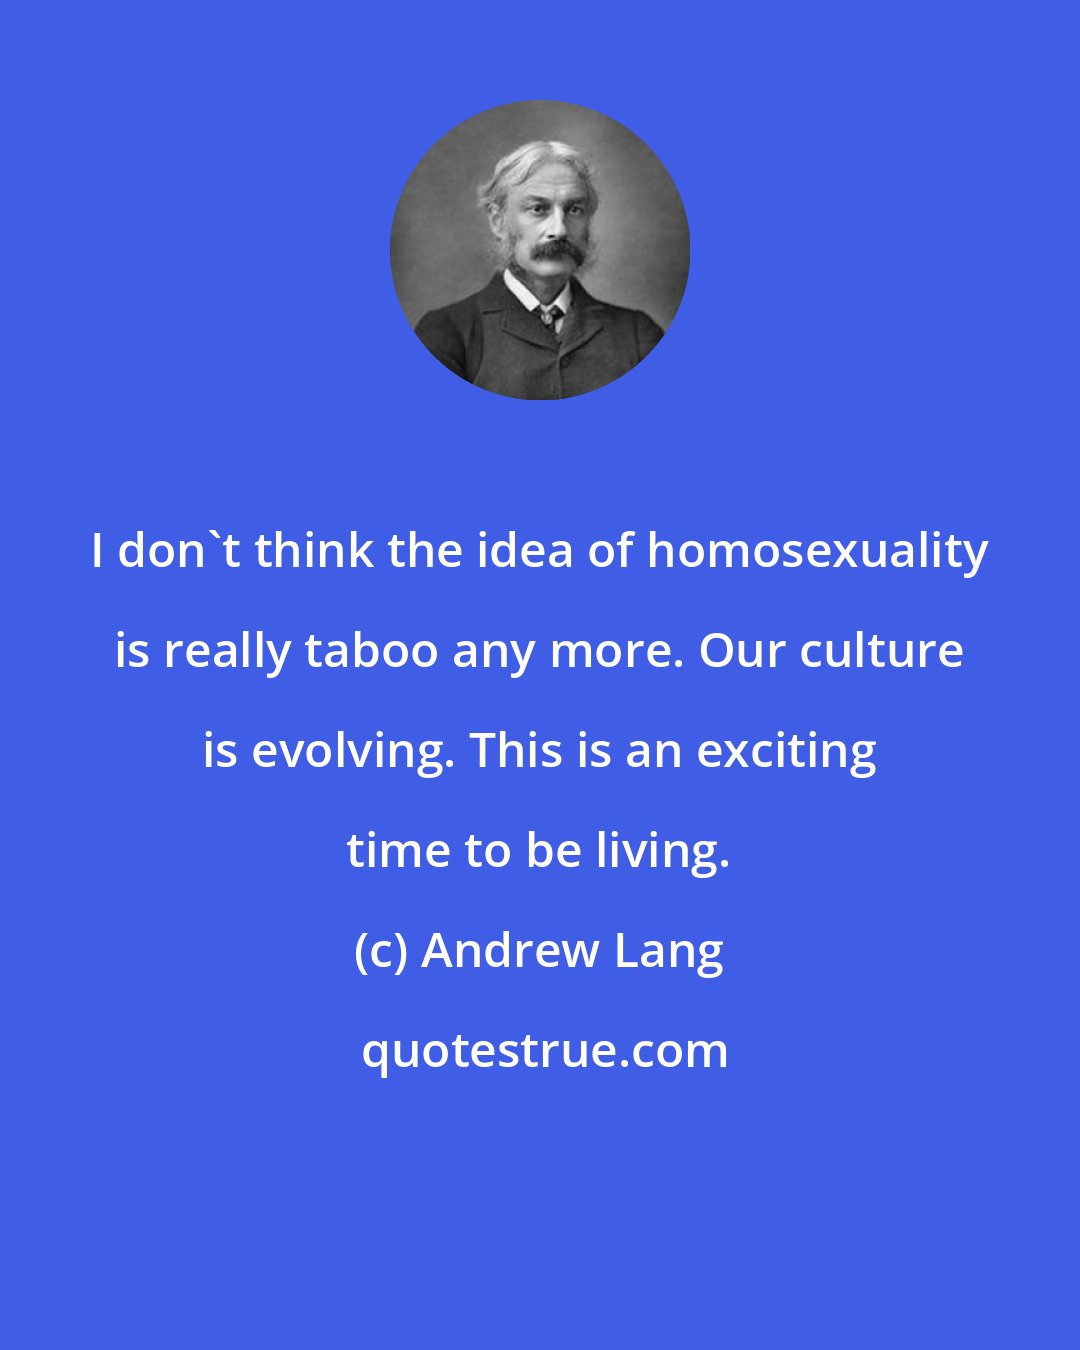 Andrew Lang: I don't think the idea of homosexuality is really taboo any more. Our culture is evolving. This is an exciting time to be living.